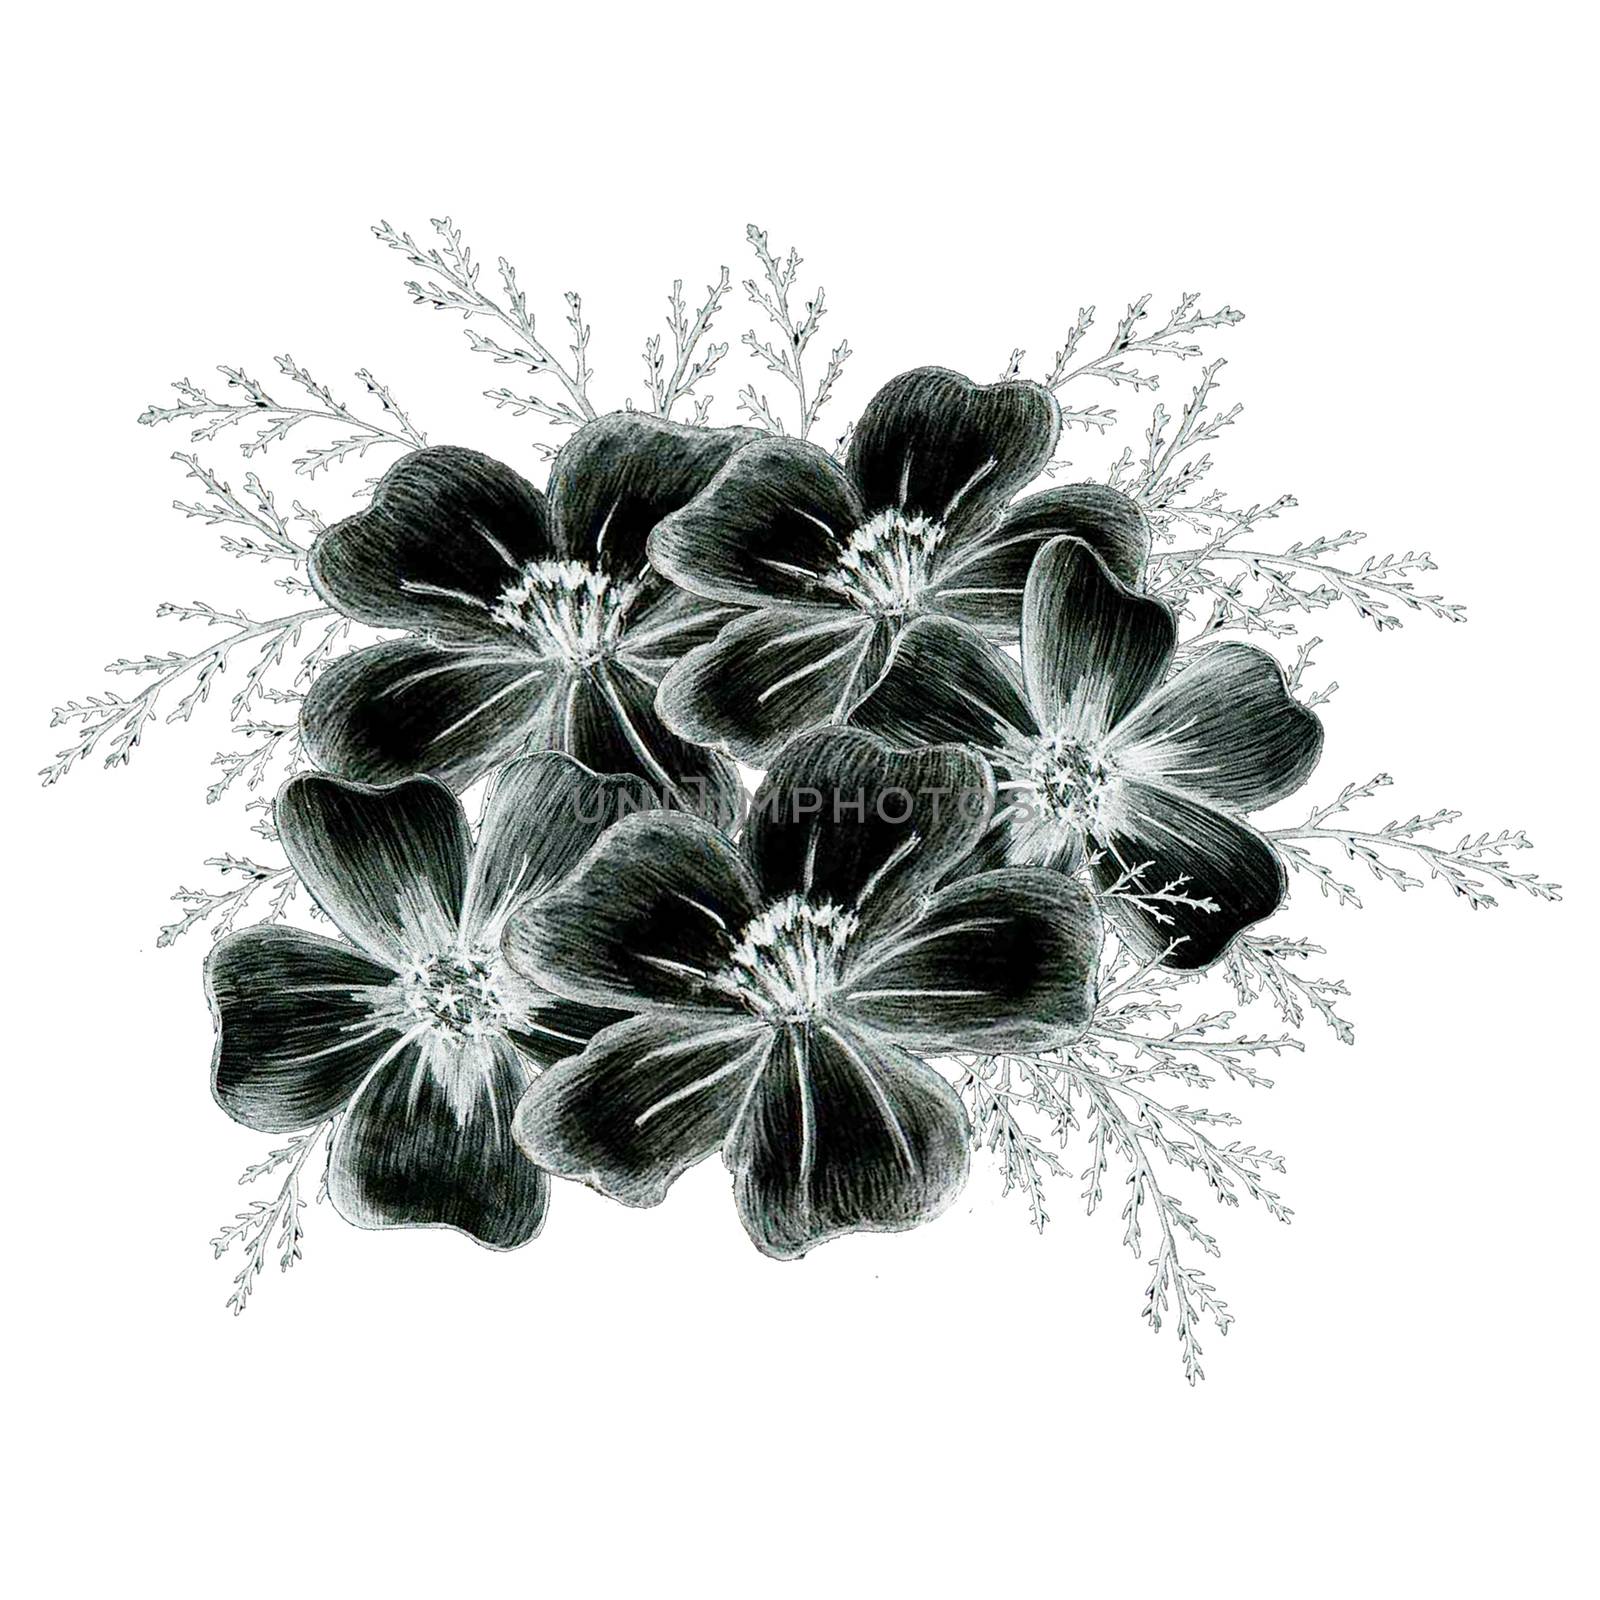 Black and White Hand-Drawn Isolated Flower Composition. Monochrome Botanical Plant Illustration in Sketch Style. Thin-leaved Marigolds for Print, Tattoo, Design, Holiday, Wedding and Birthday Card.